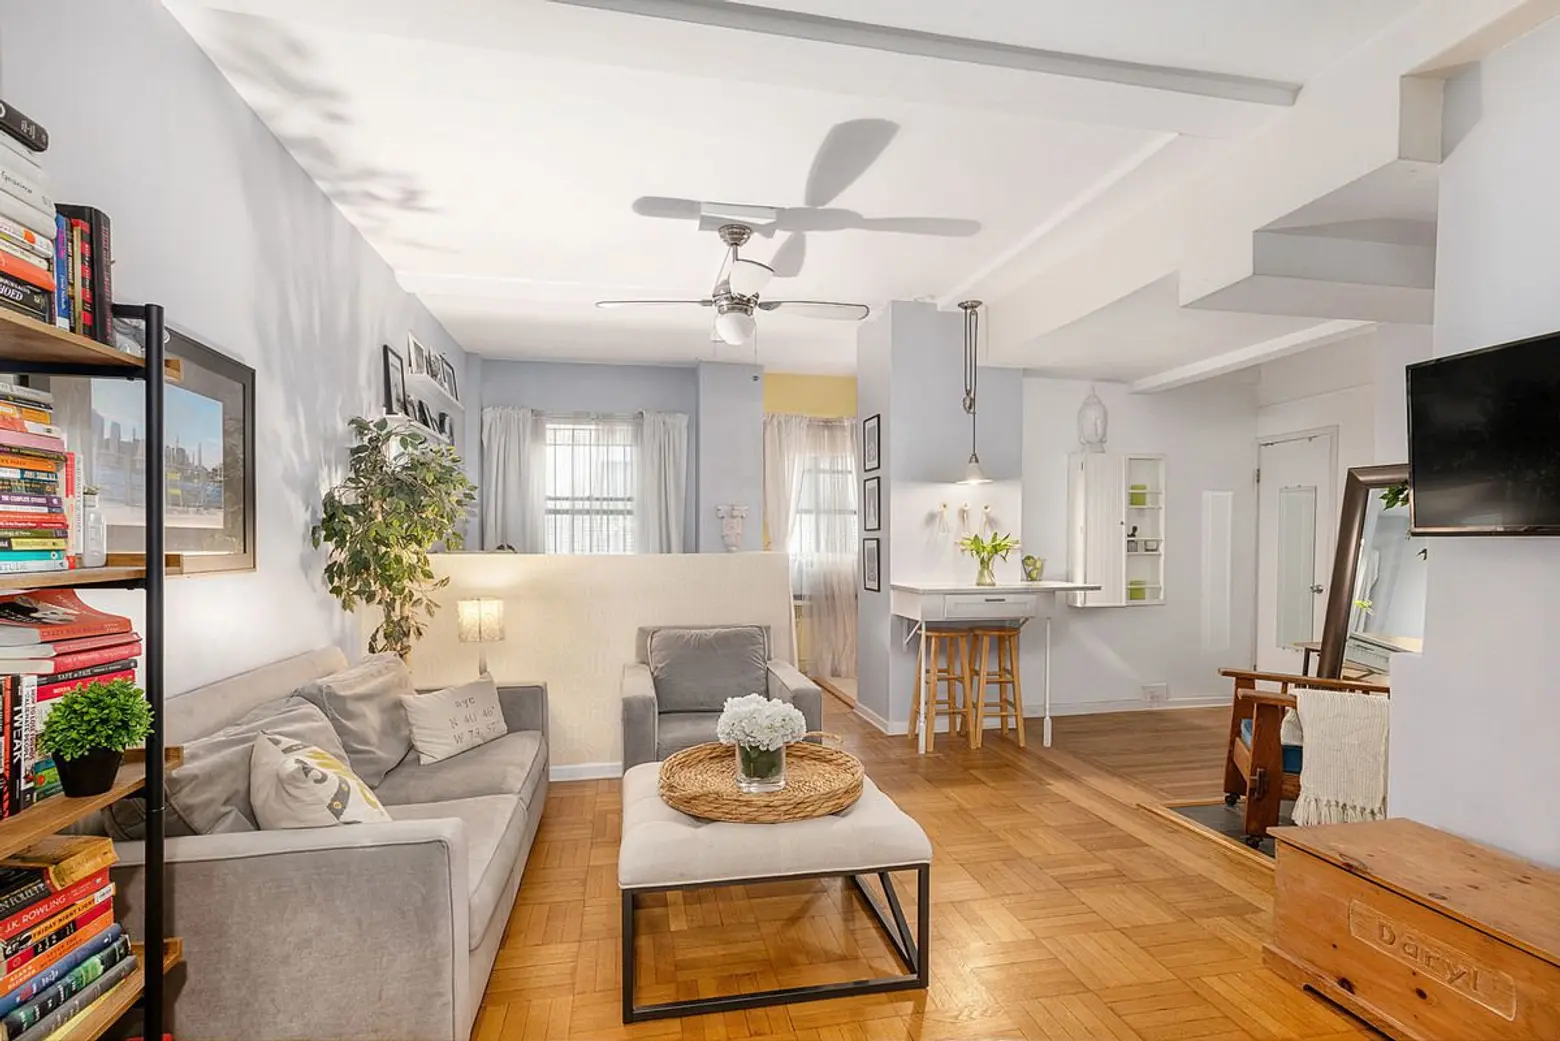 $419K Upper East Side co-op packs pre-war charm and plenty of character into its studio layout